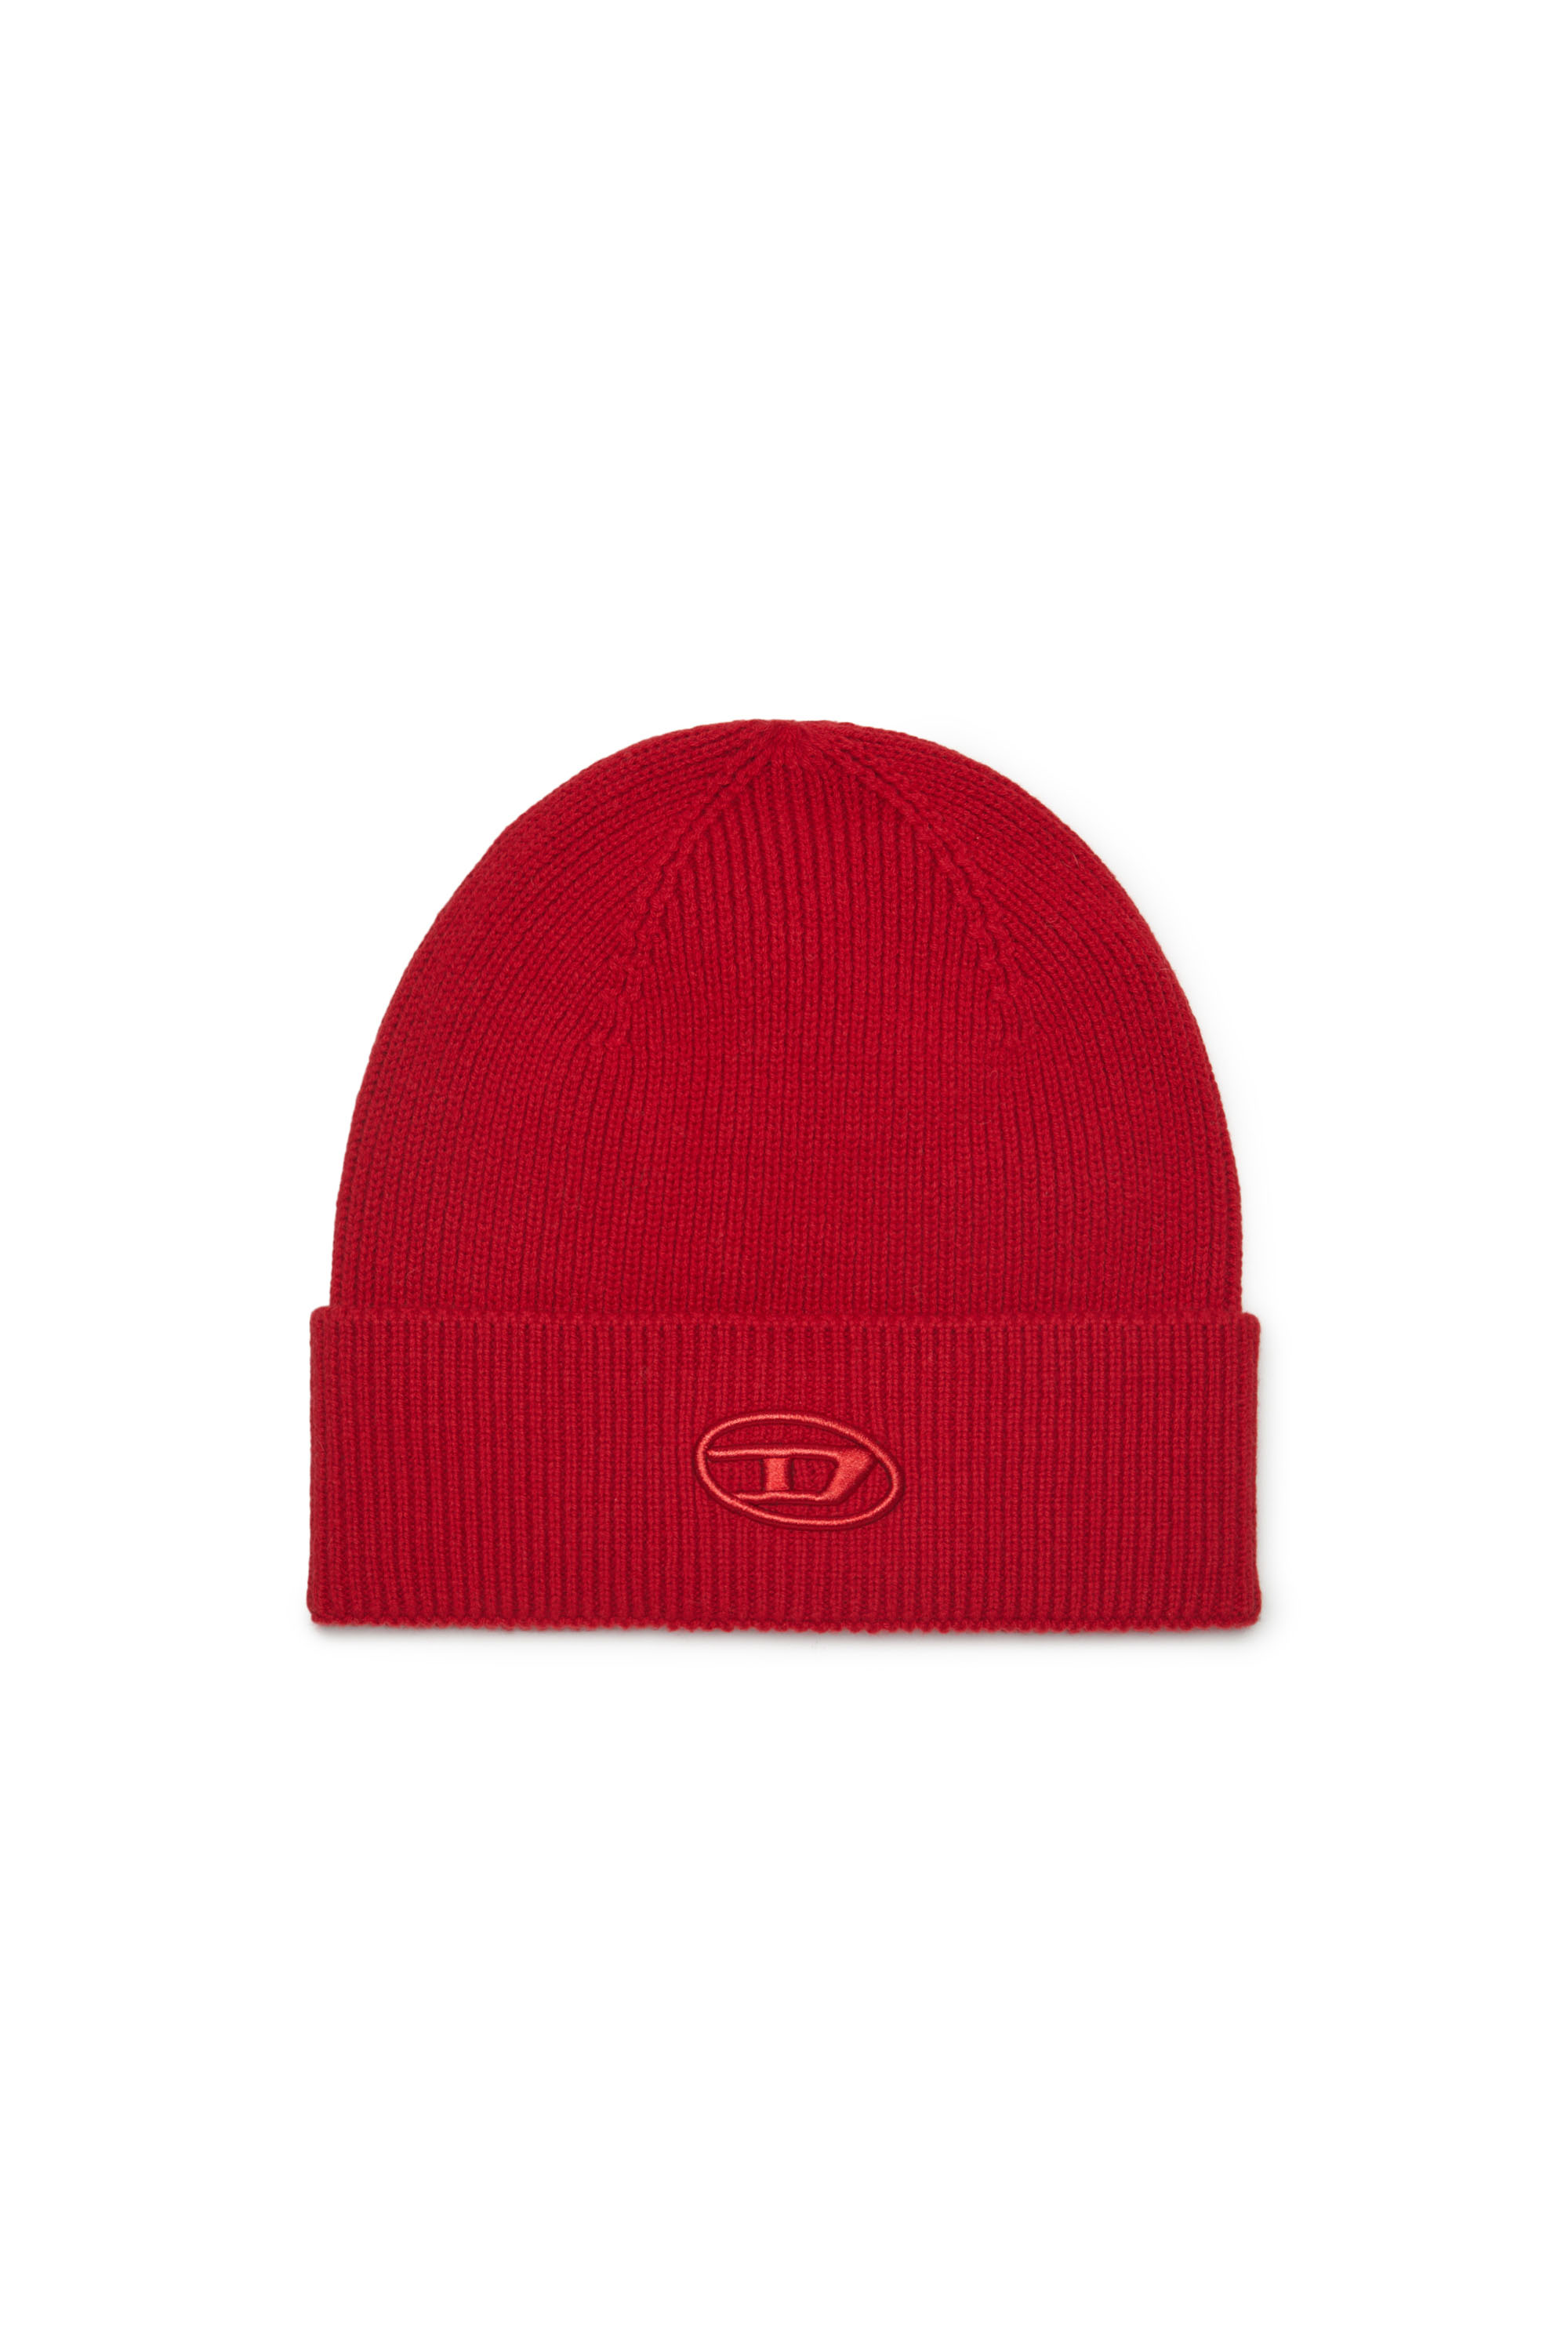 Diesel Ribbed Beanie With D Embroidery In Red